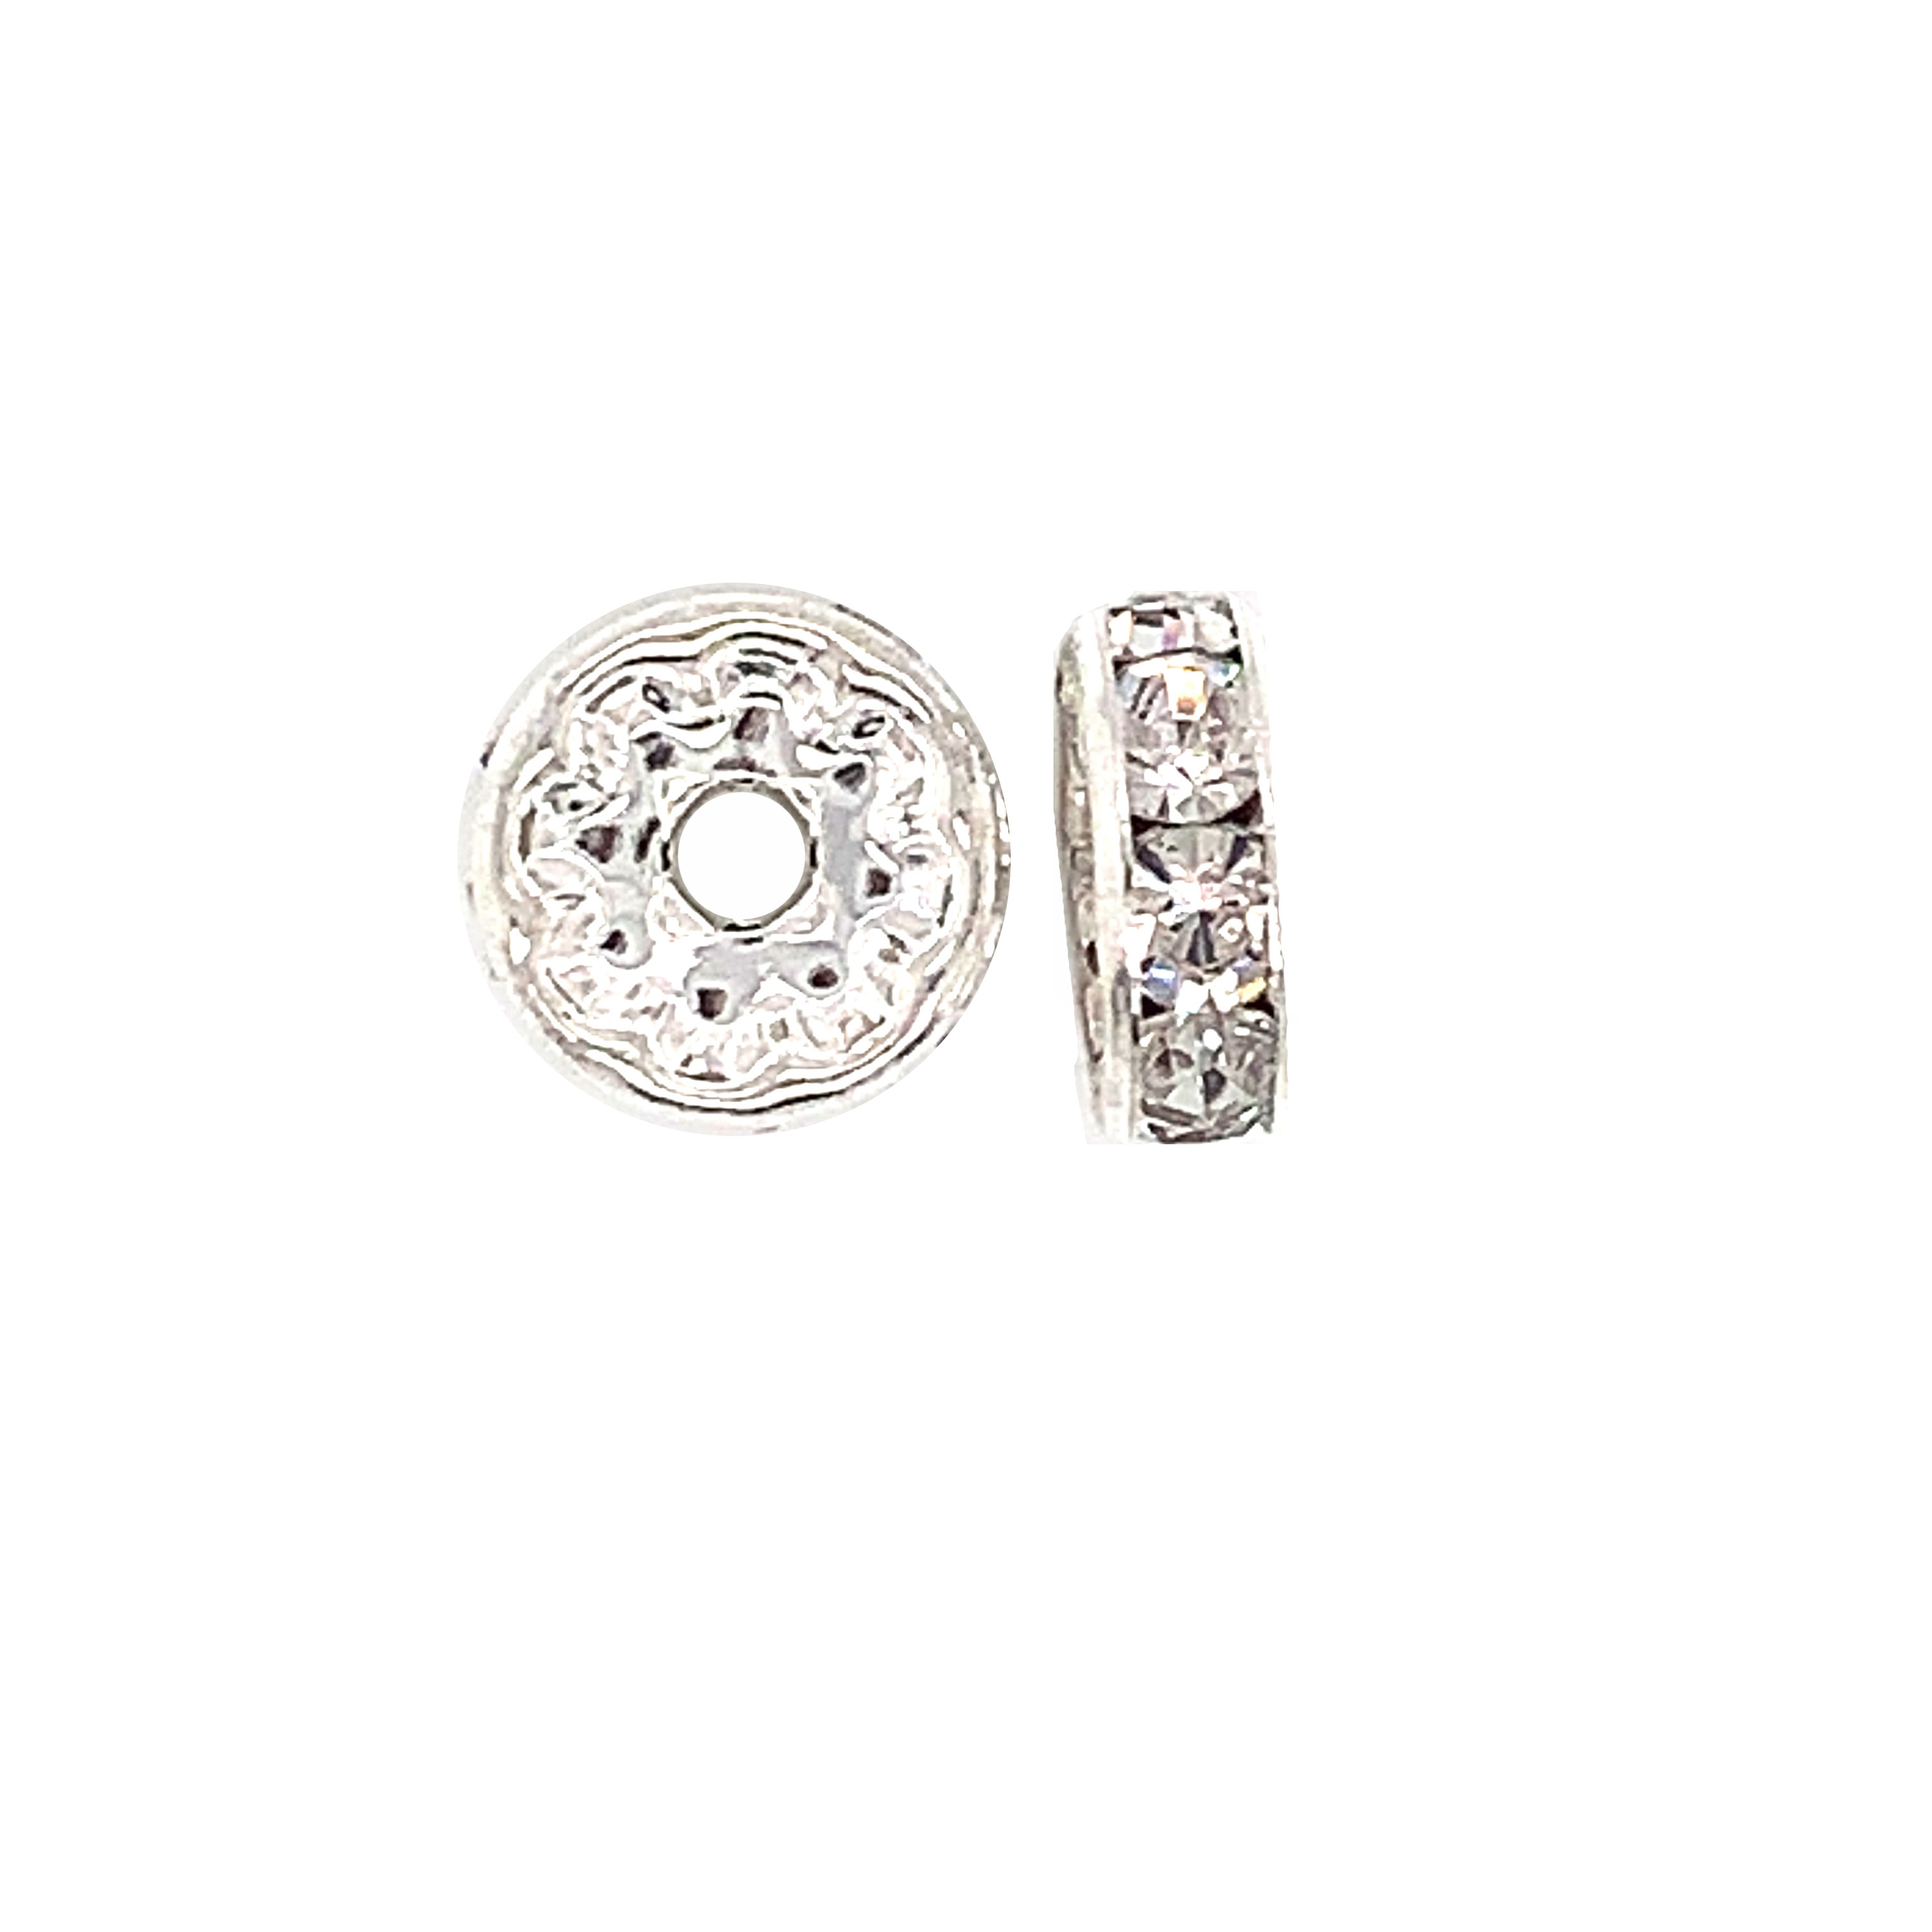 CZ 10mm Silver Tone Rondelle - Pack of 10